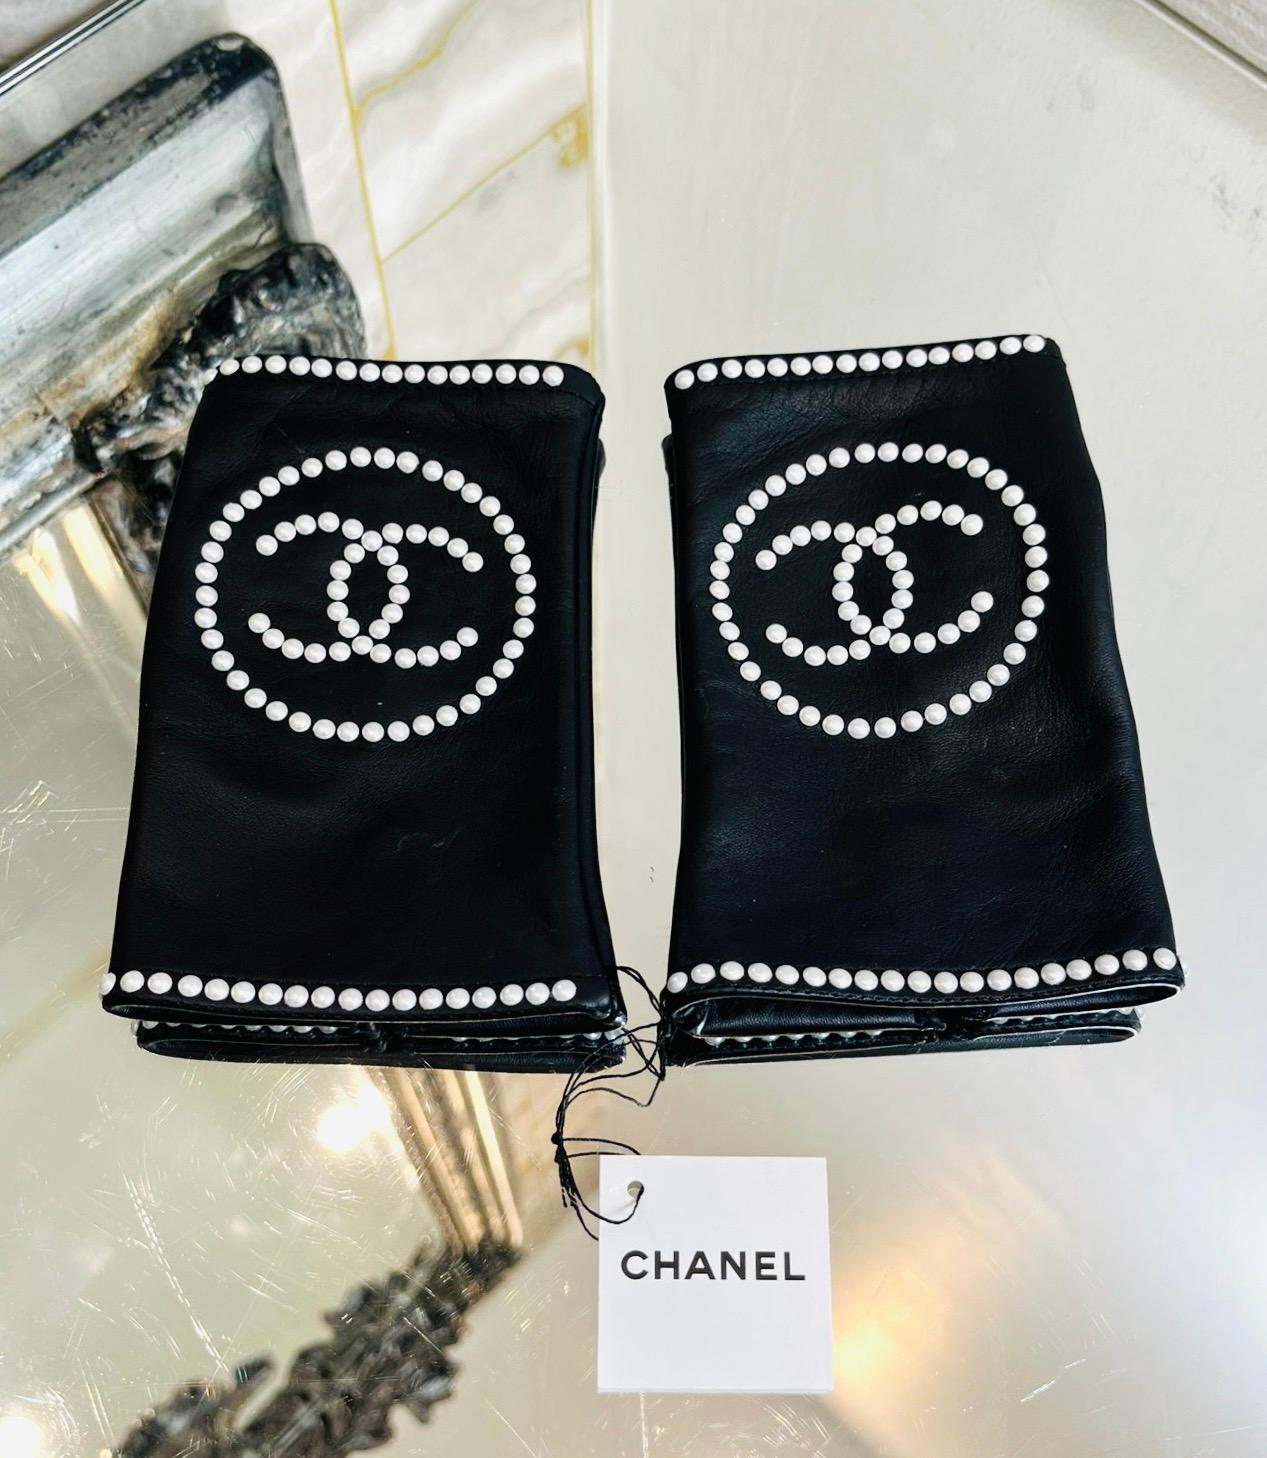 Brand New - Chanel 'CC' Logo Leather & Pearl Fingerless Gloves

Smooth, black gloves designed with white, faux pearl 'CC' logo to the front.

Featuring slip-on style and pearl lined edges.

From 2020 Collection.

Size – 7

Condition – Brand New,